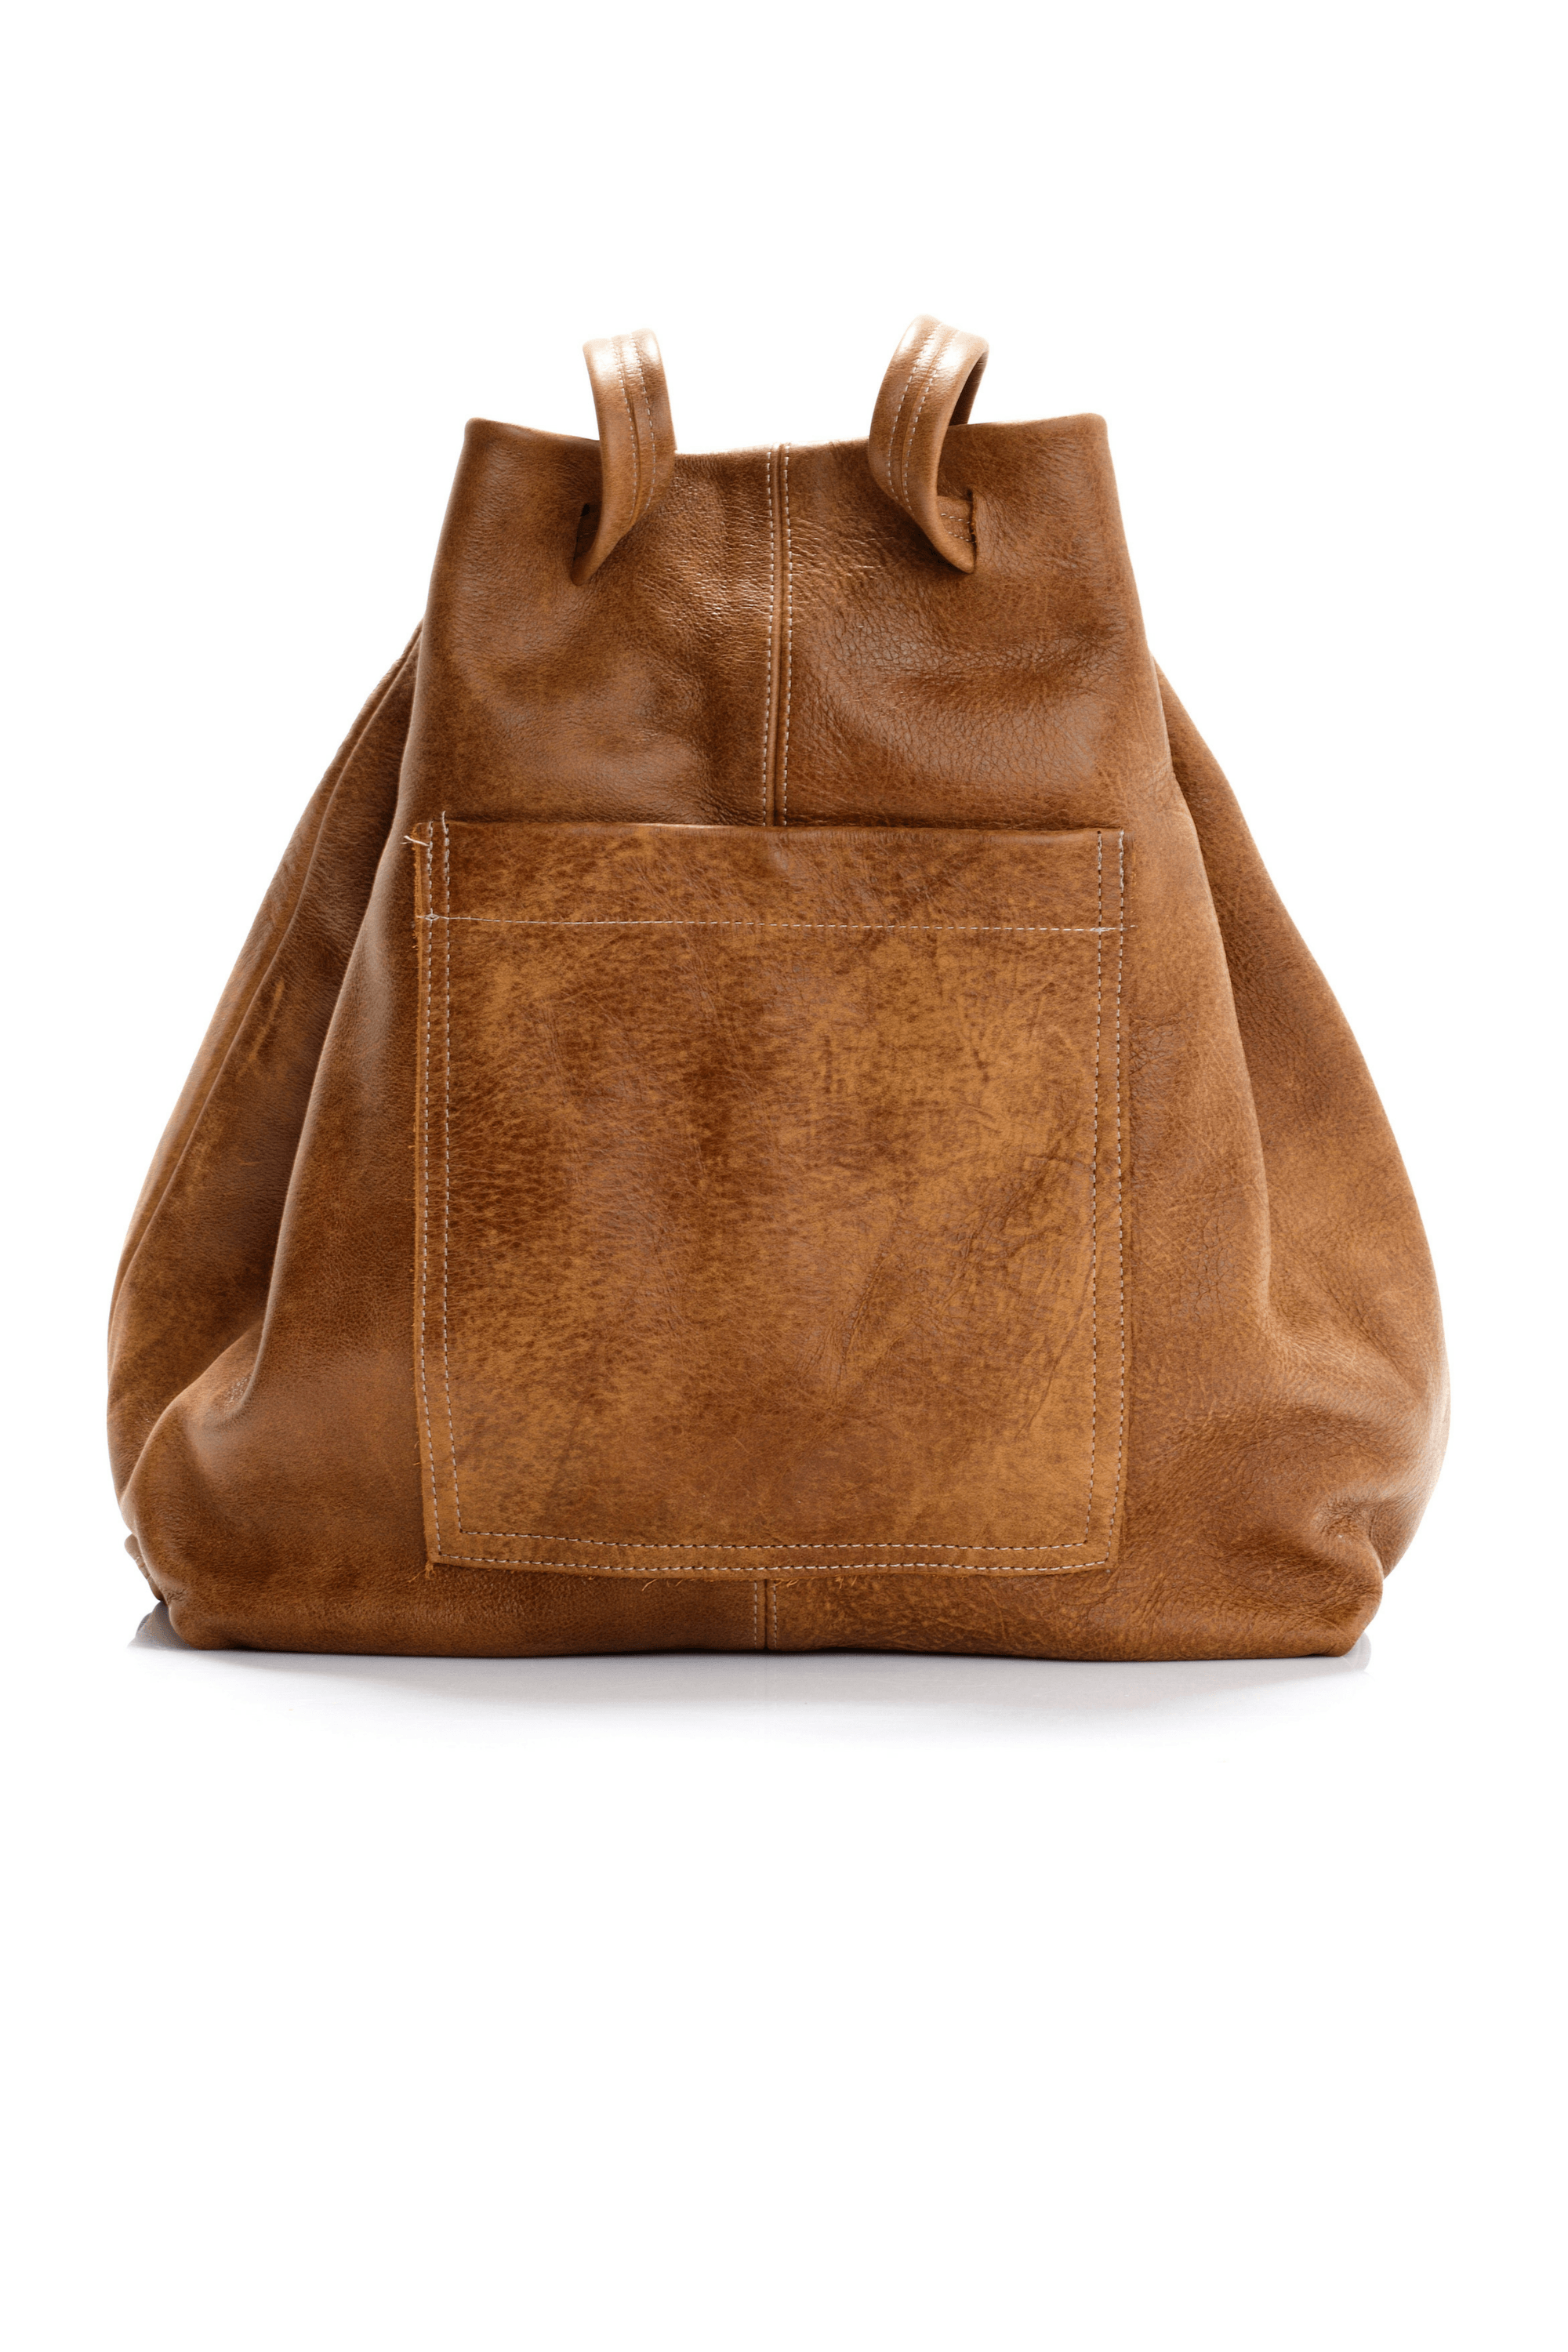 SOFT LEATHER Women's Drawstring Backpack